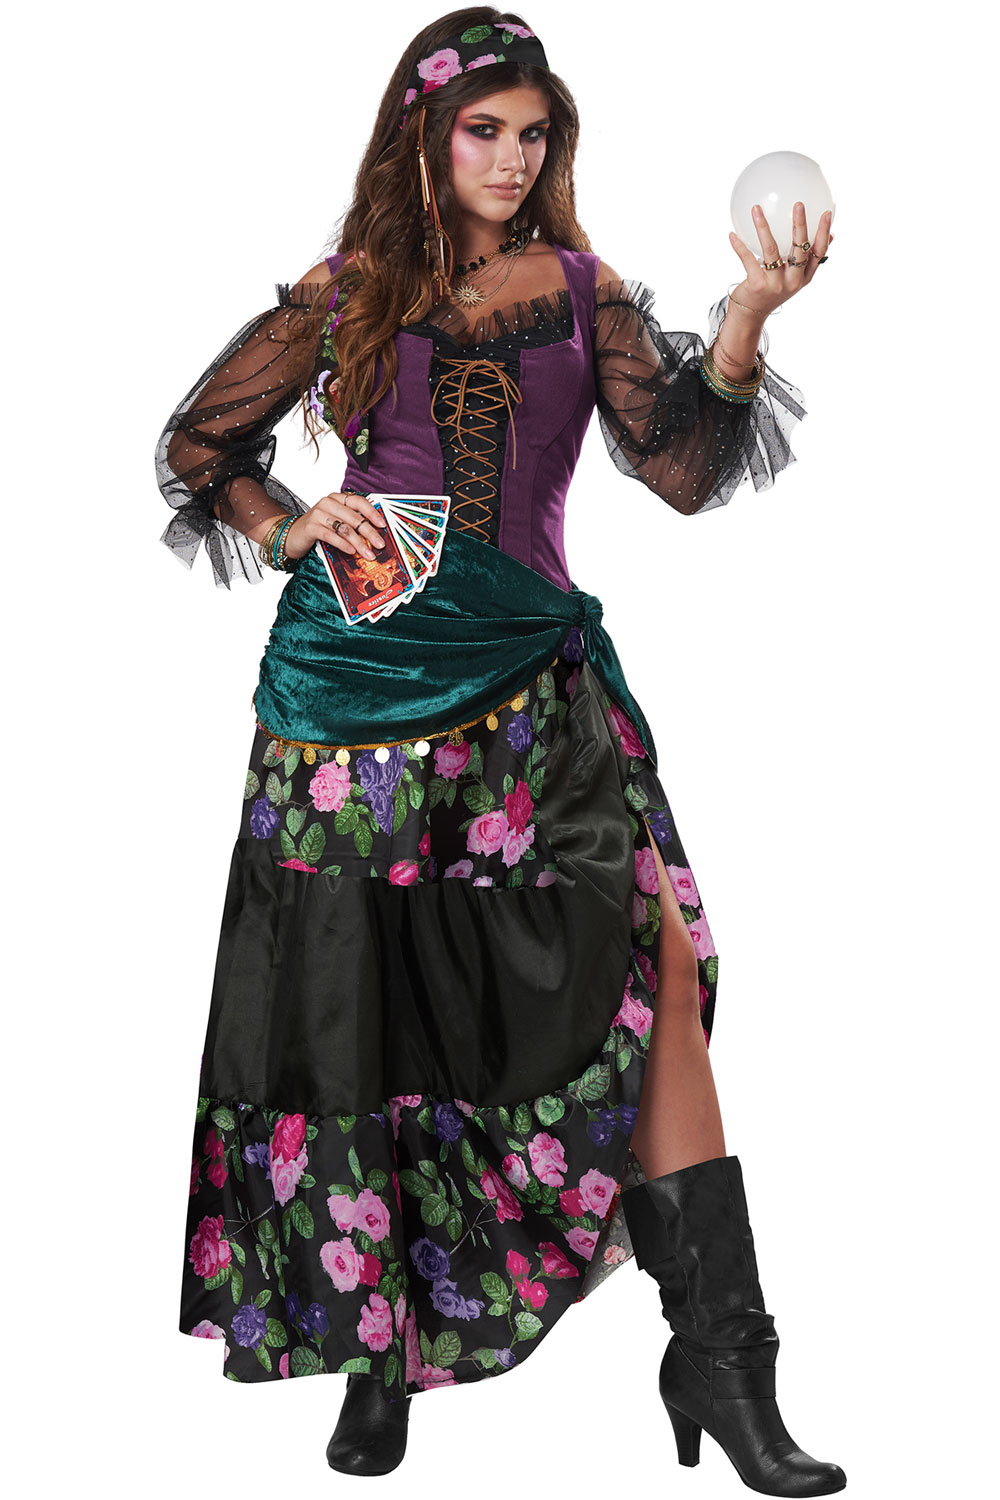 California Costume Adult Women Gypsy Fortune Teller Halloween Outfit 01108 Ebay